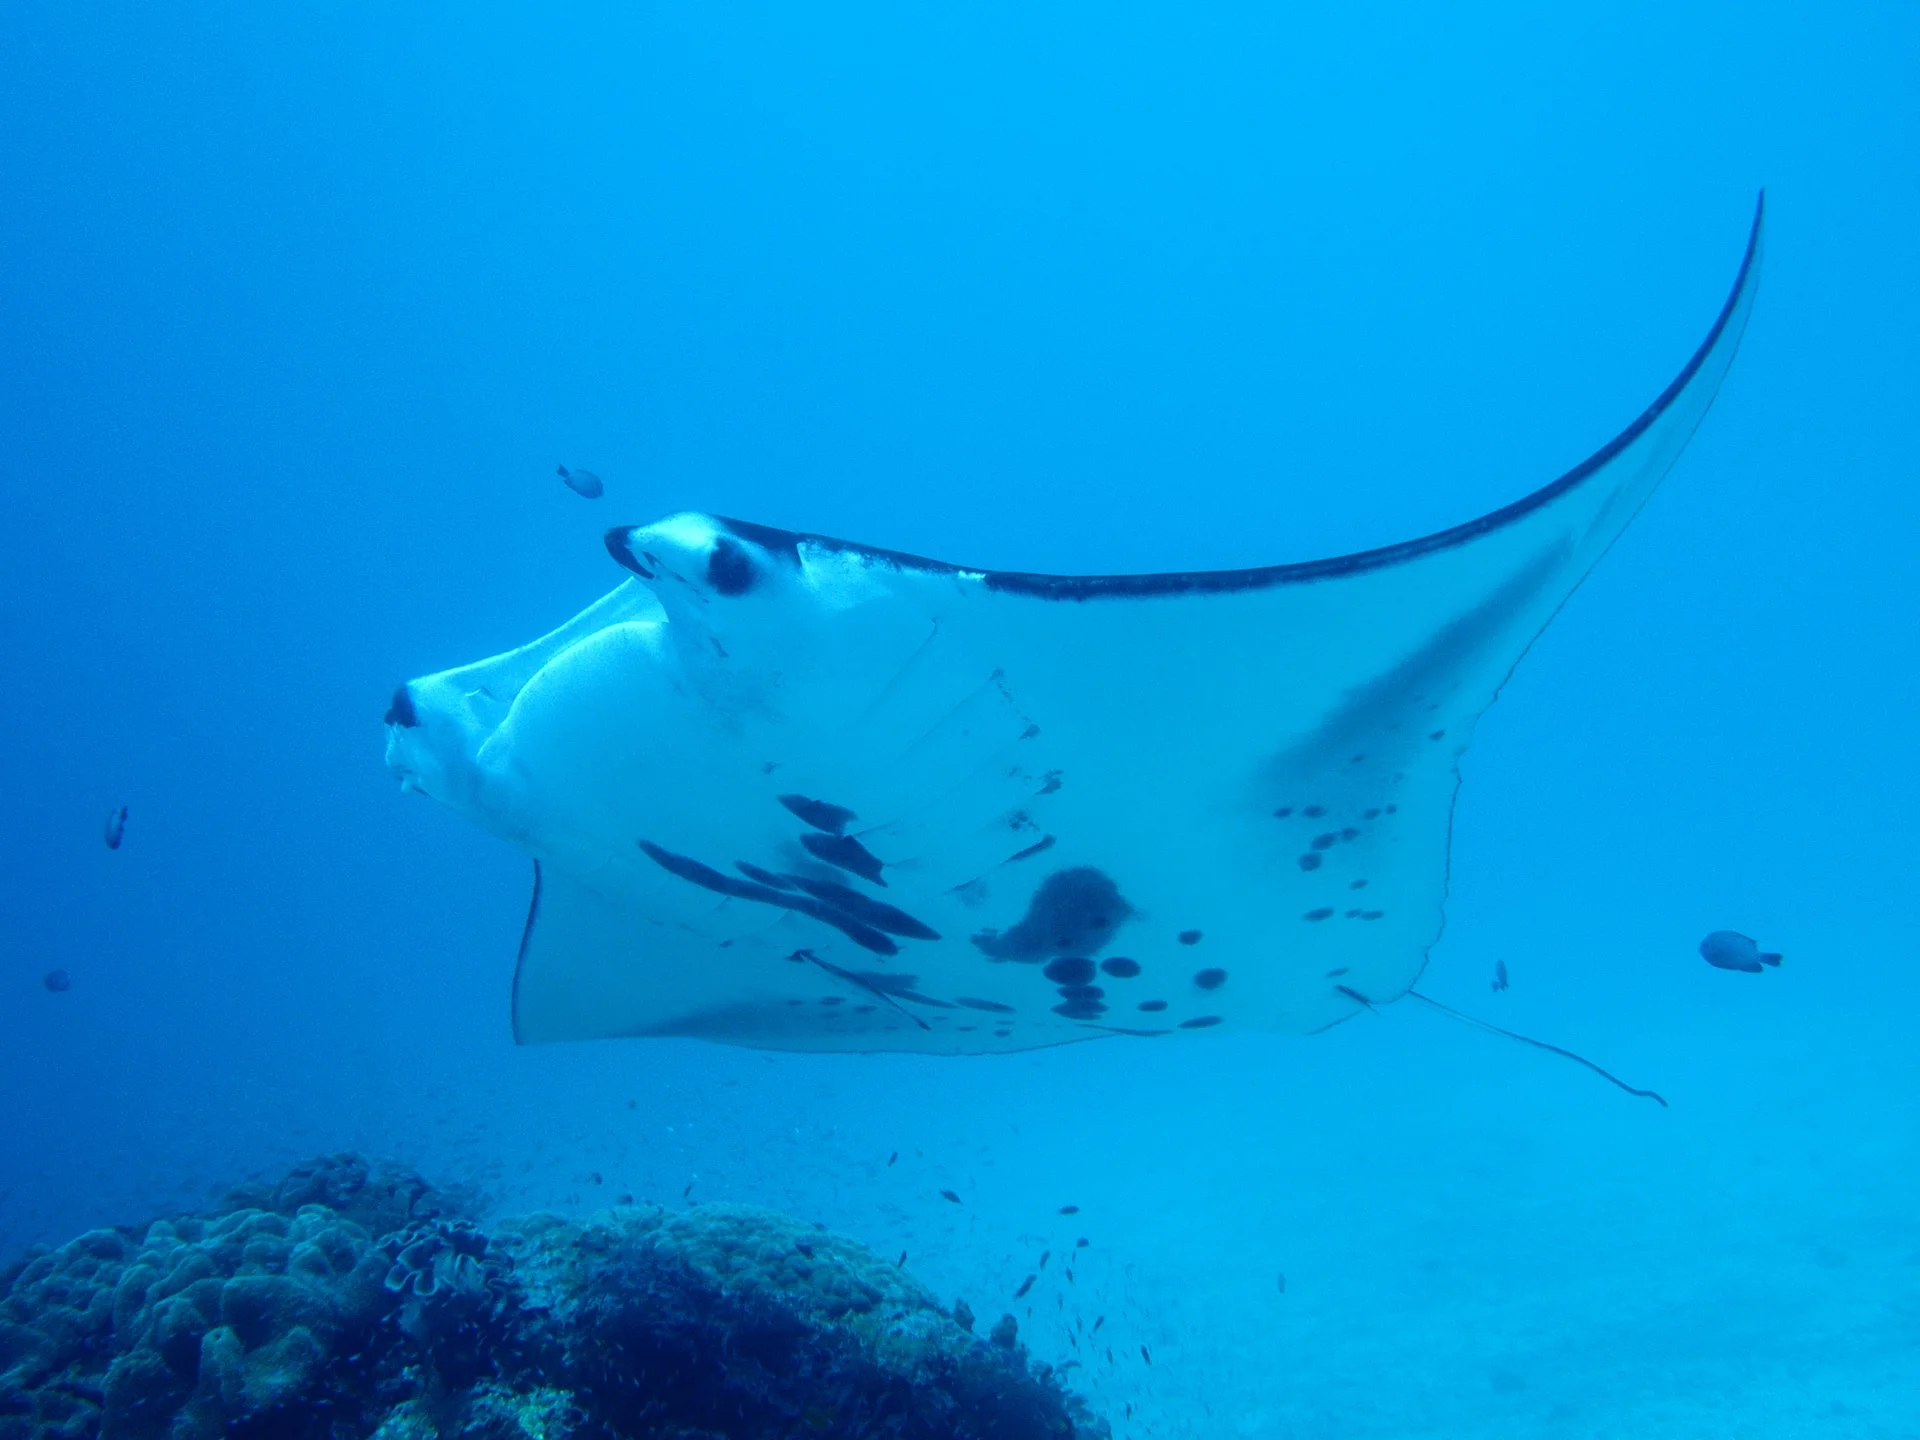 Manta ray at a cleaning station - Photo by Swanson Chan at unsplash